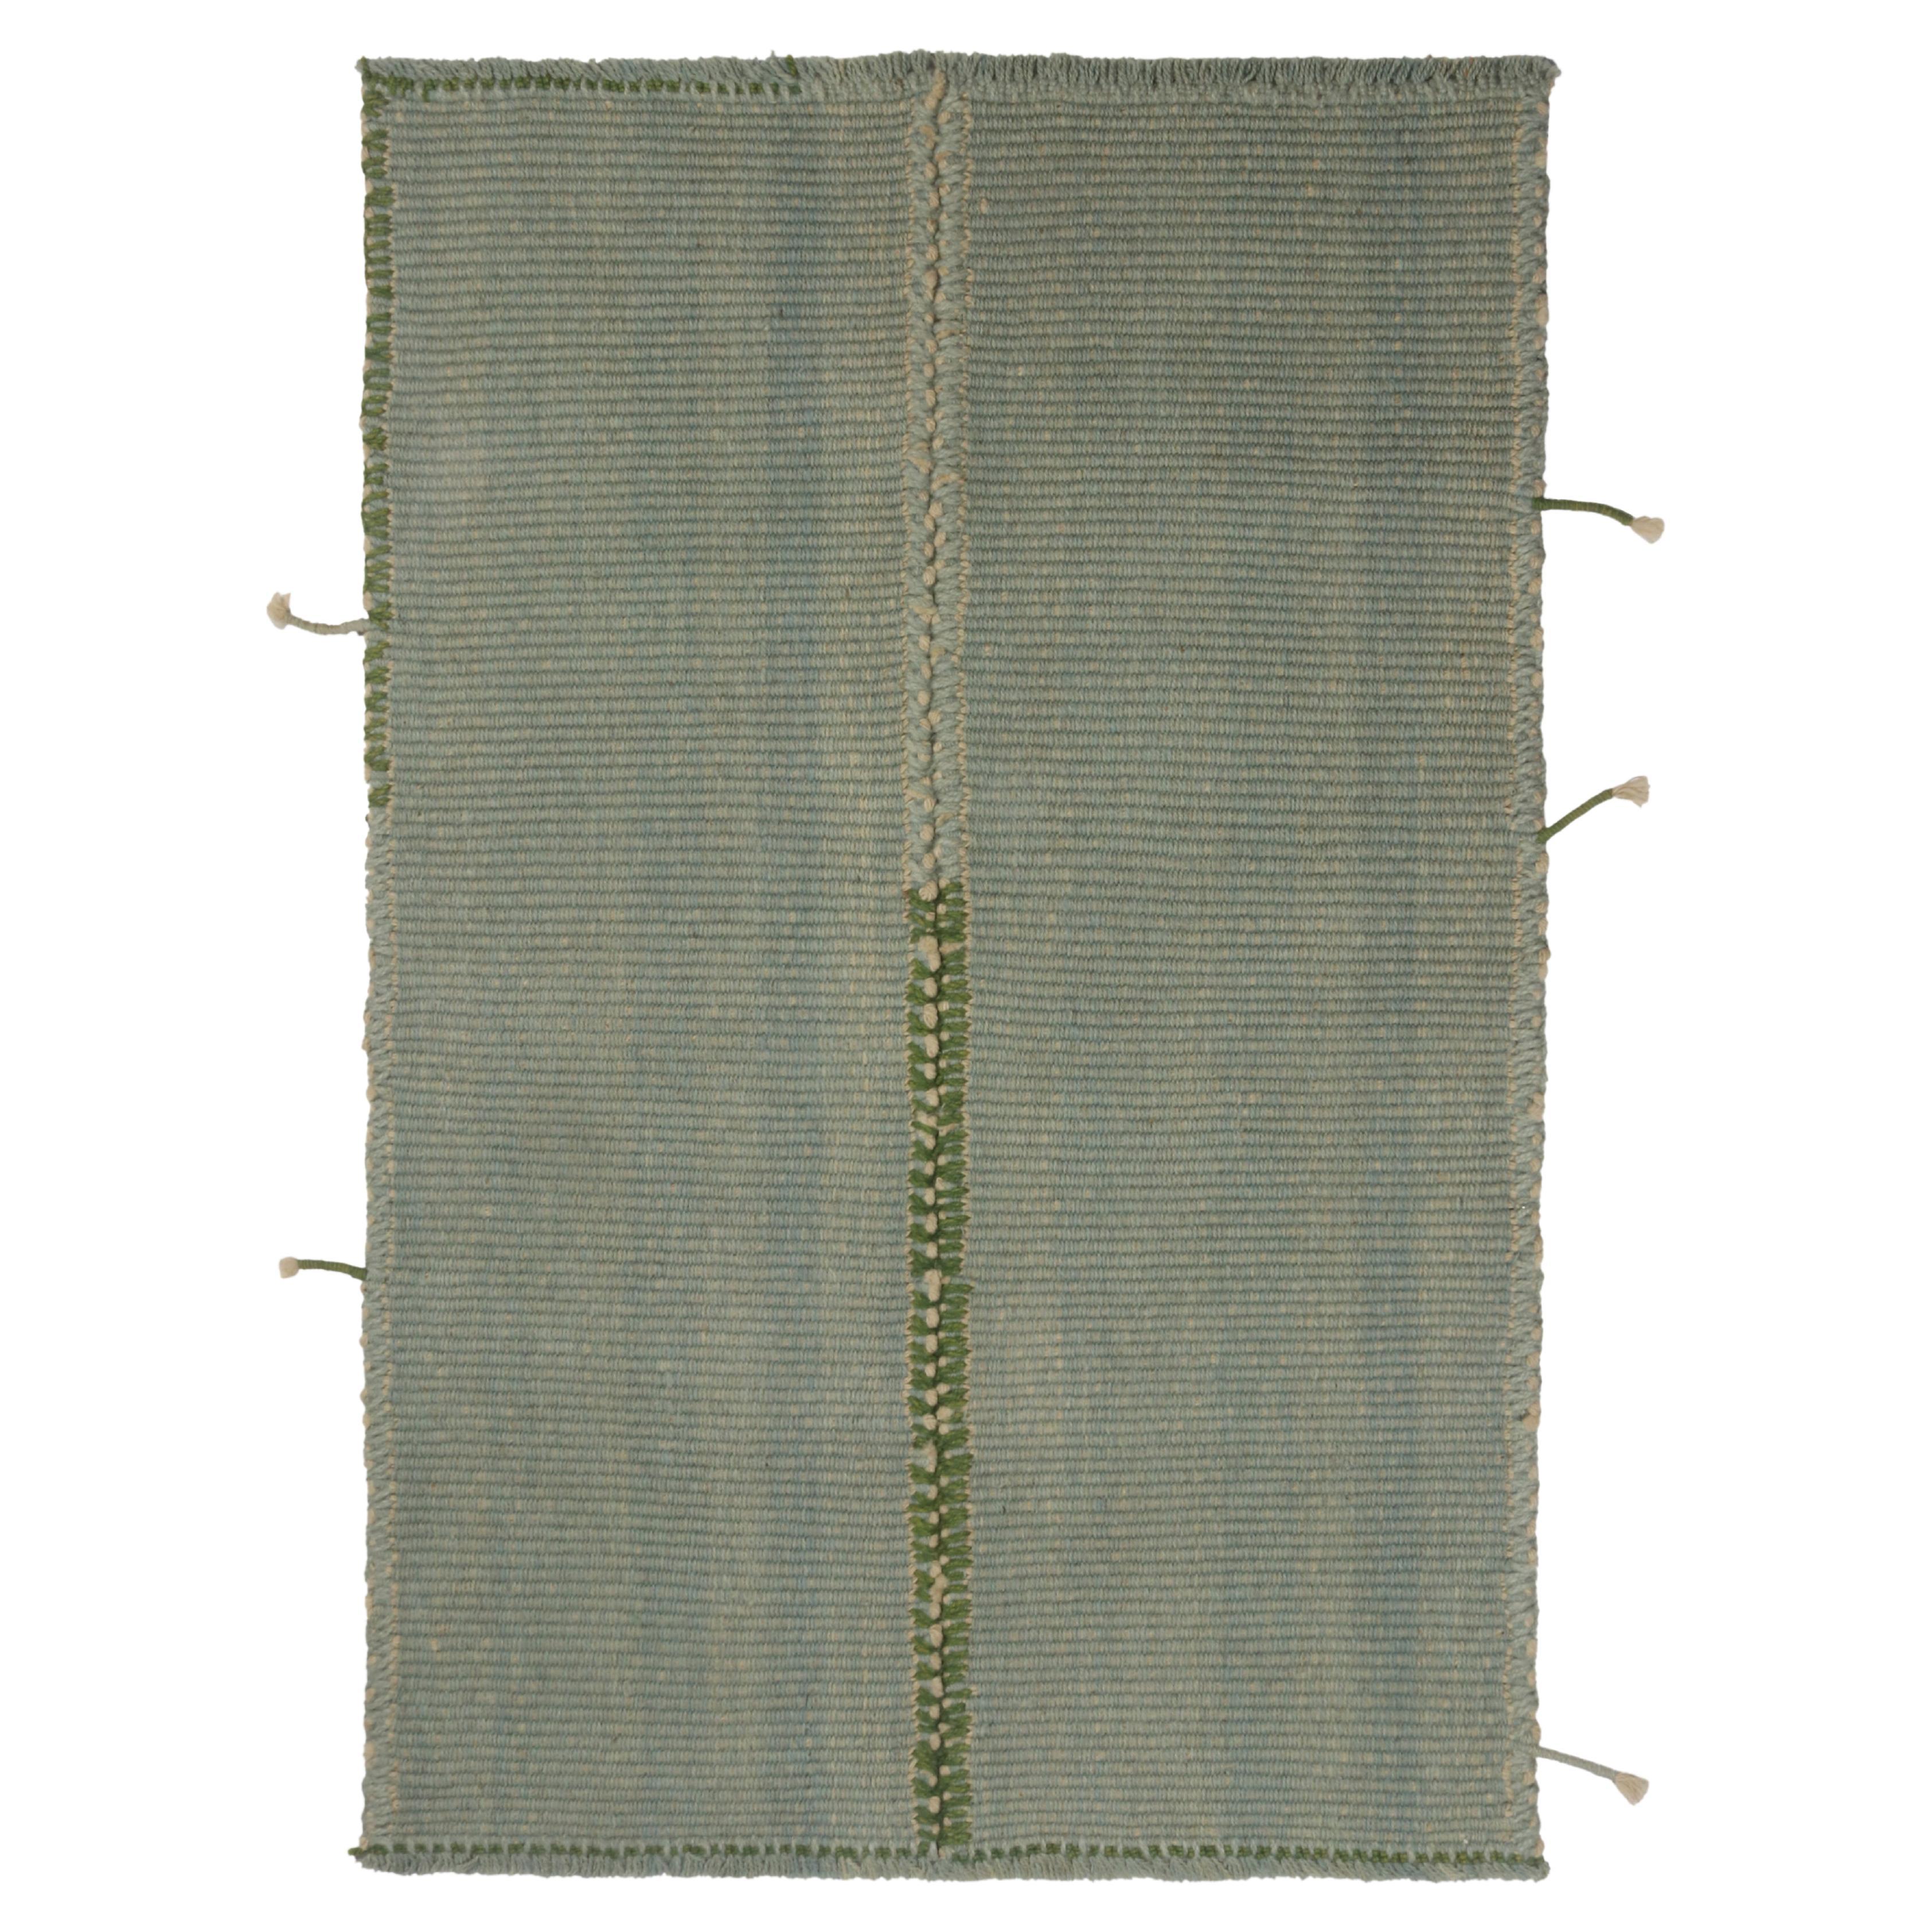 Rug & Kilim’s Contemporary Kilim in Seafoam Blue with Green and White Accents For Sale